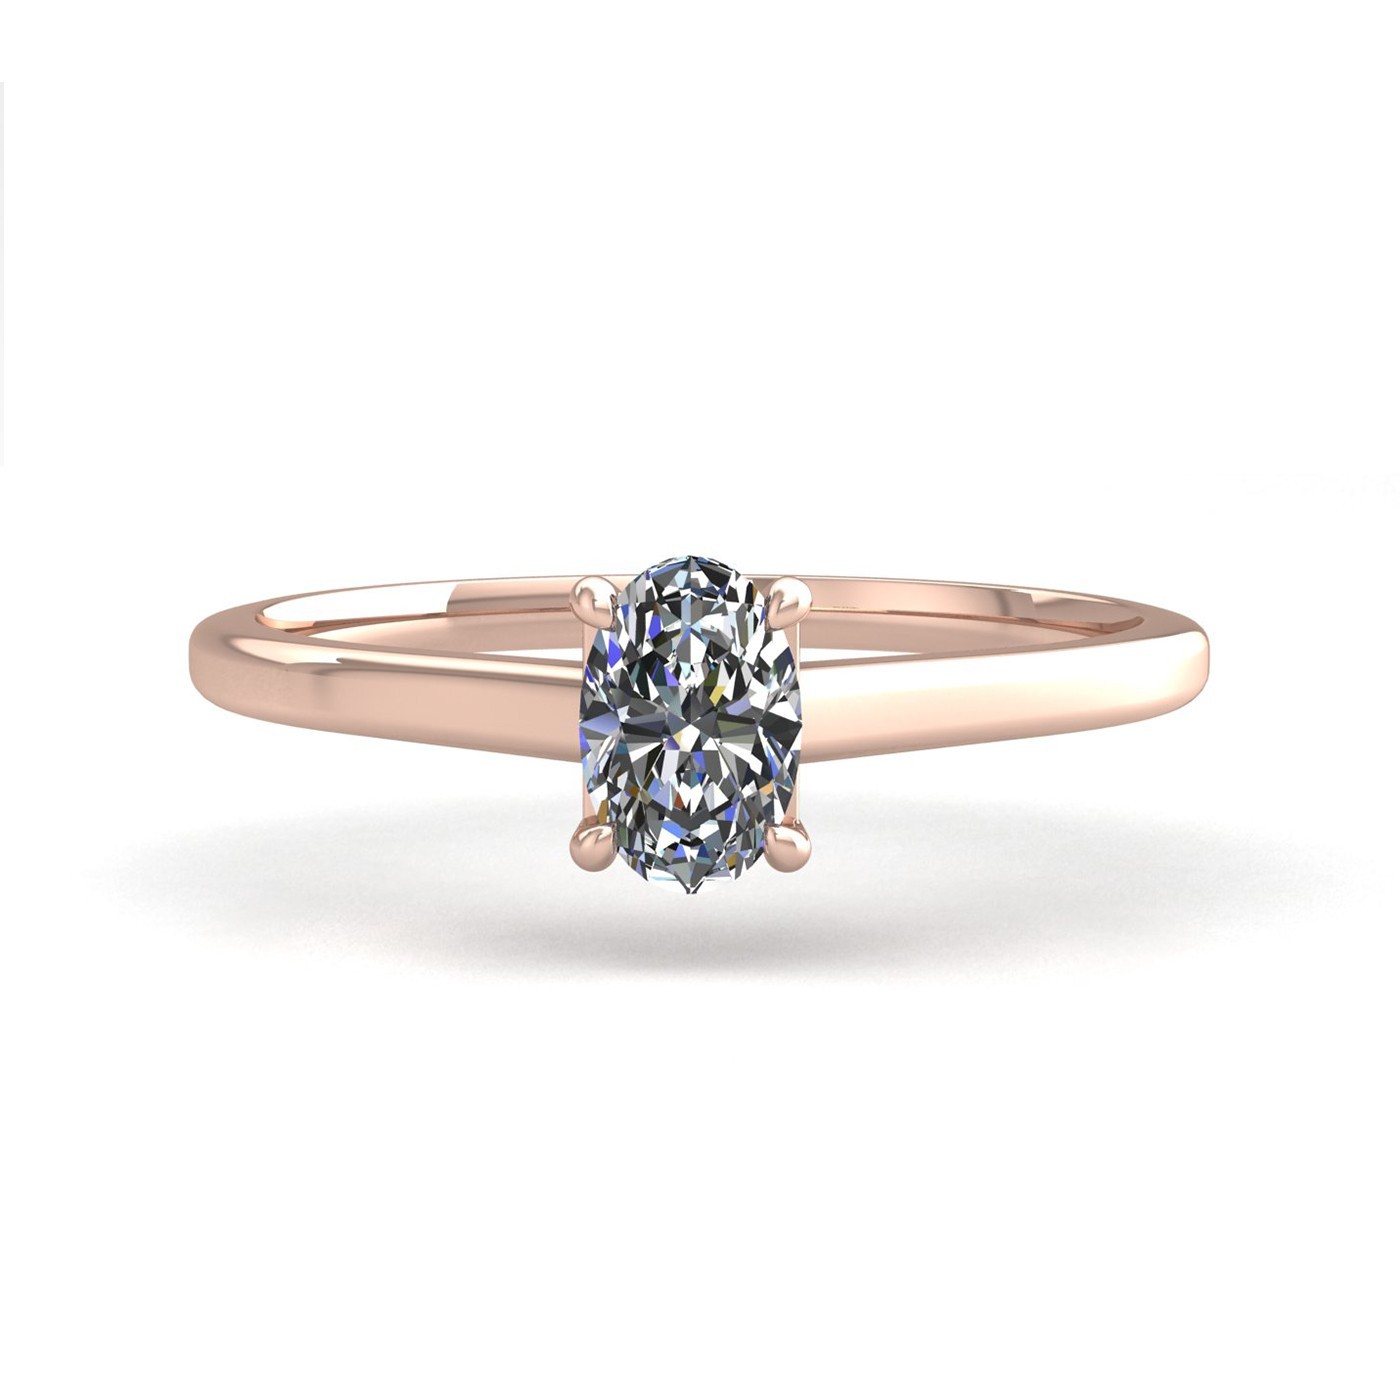 18k rose gold  1,50 ct 4 prongs solitaire oval cut diamond engagement ring with whisper thin band Photos & images